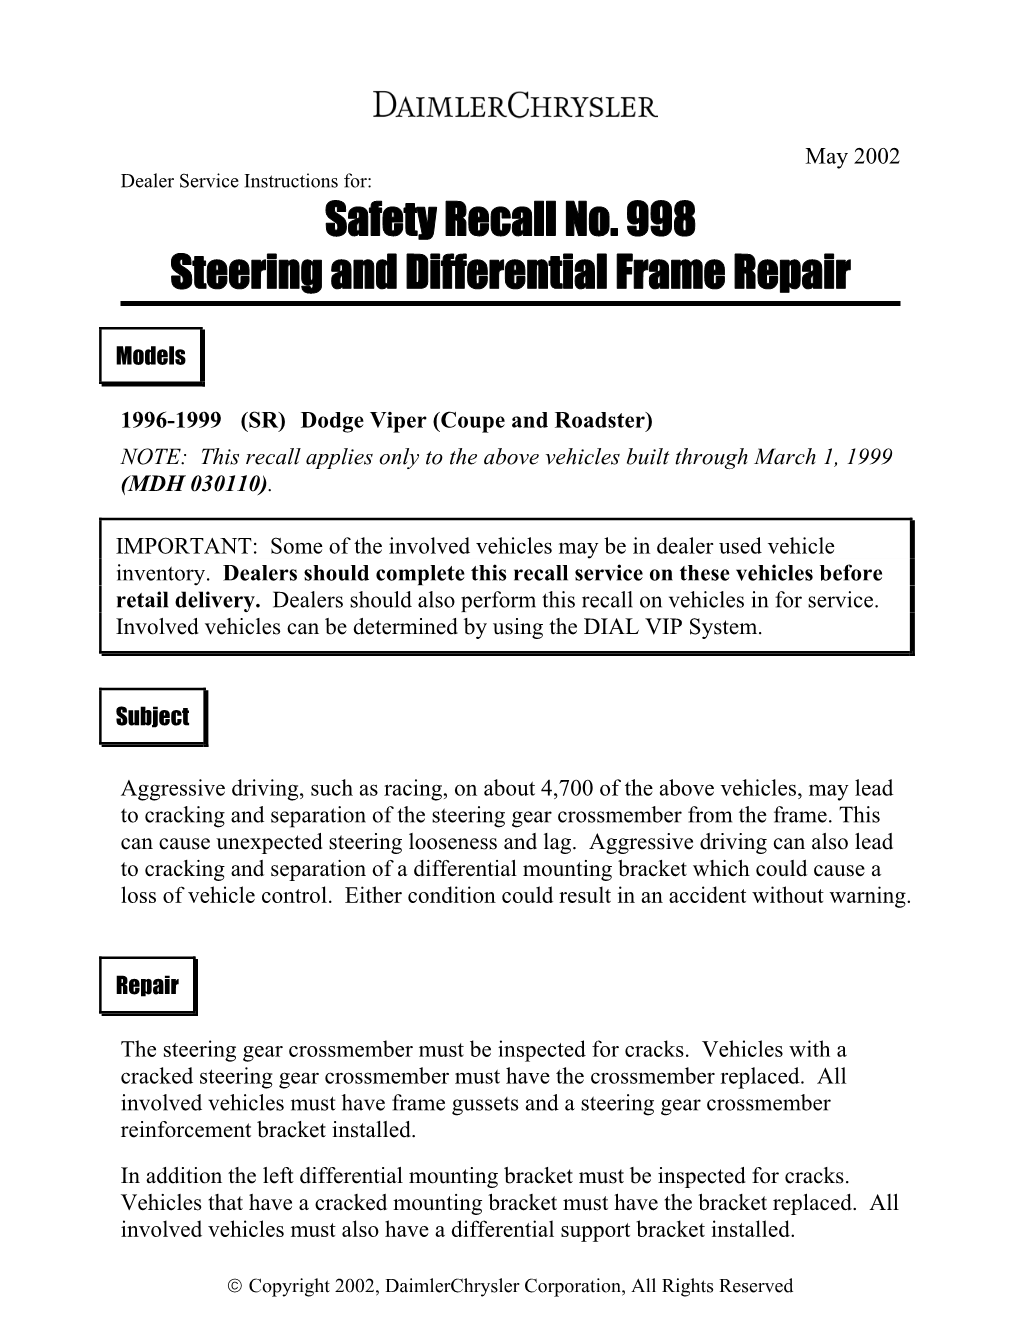 Safety Recall No. 998 Steering and Differential Frame Repair